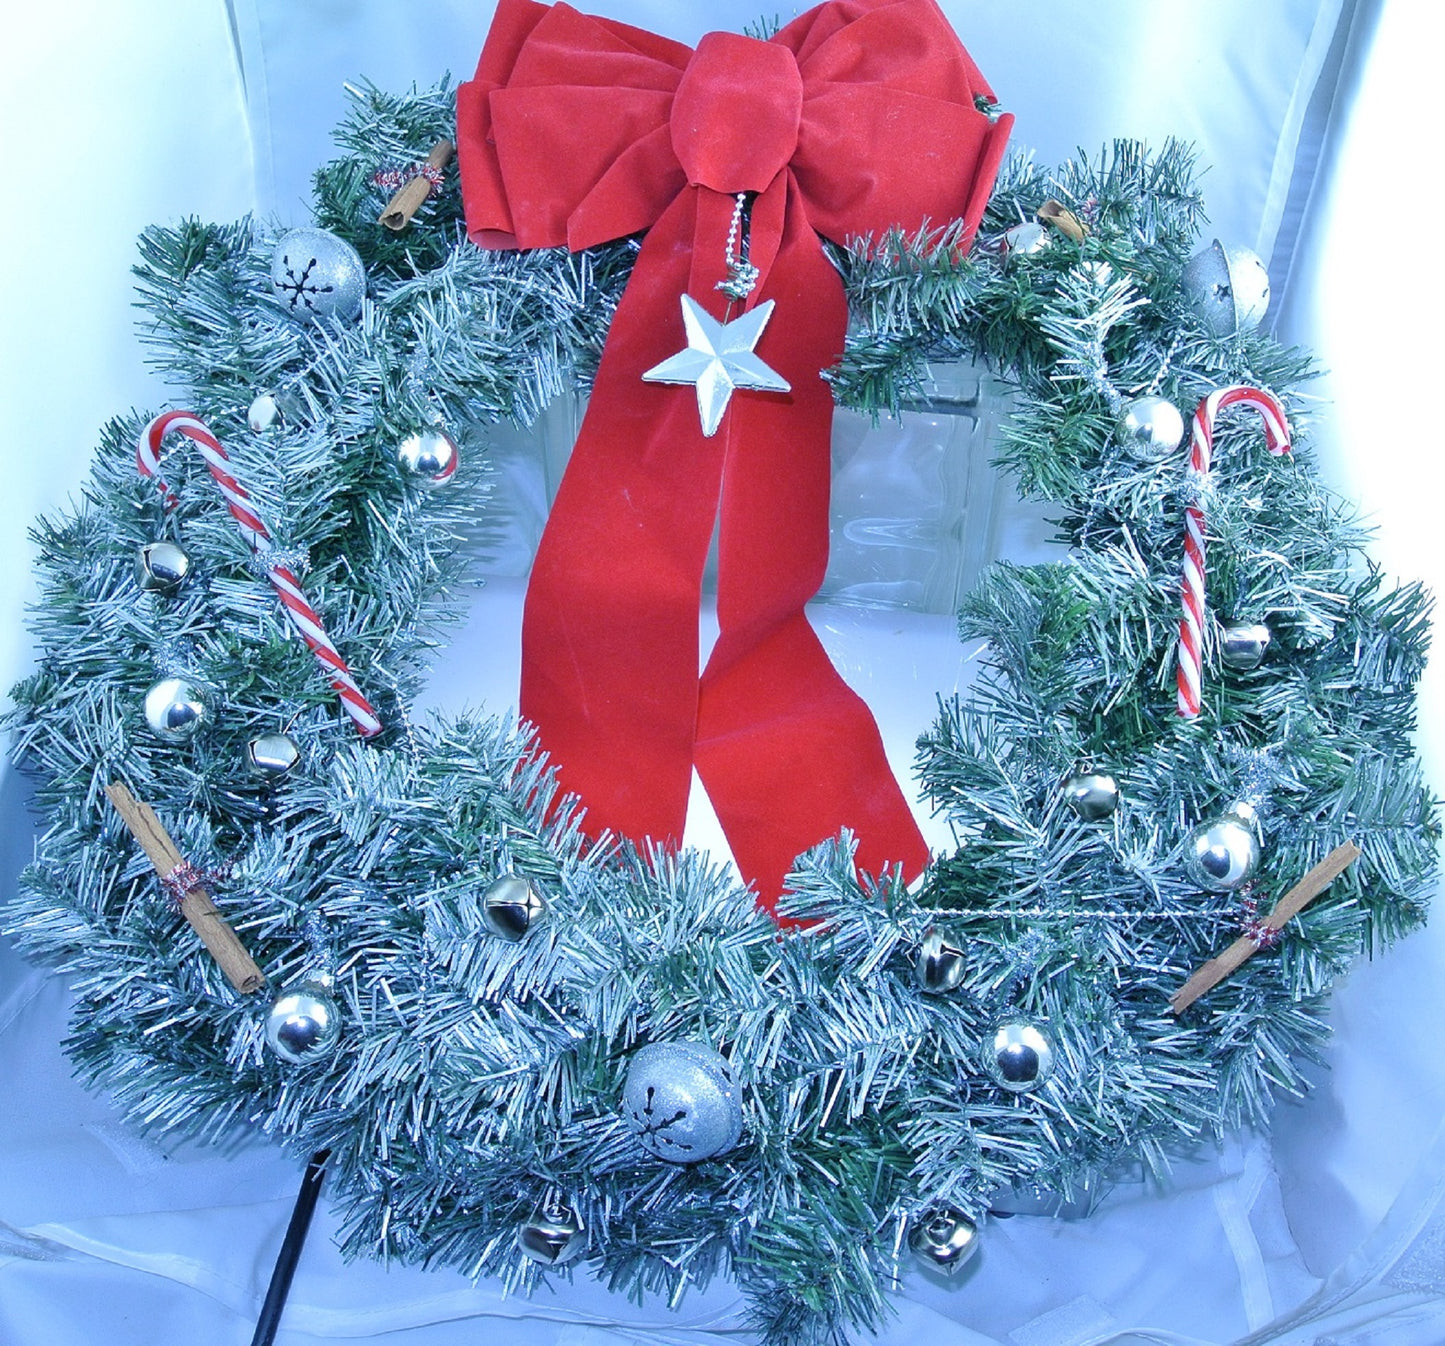 CHRISTMAS WREATH SILVER RED WHITE CANDY CANES SILVER STAR SILVER BELLS SILVER GLASS ORNAMENTS GLITTER SILVER STAR BELLS SILVER WRAP CINNAMON STICKS RED BOW STARR WILDE STEAMPUNK FORTRESS